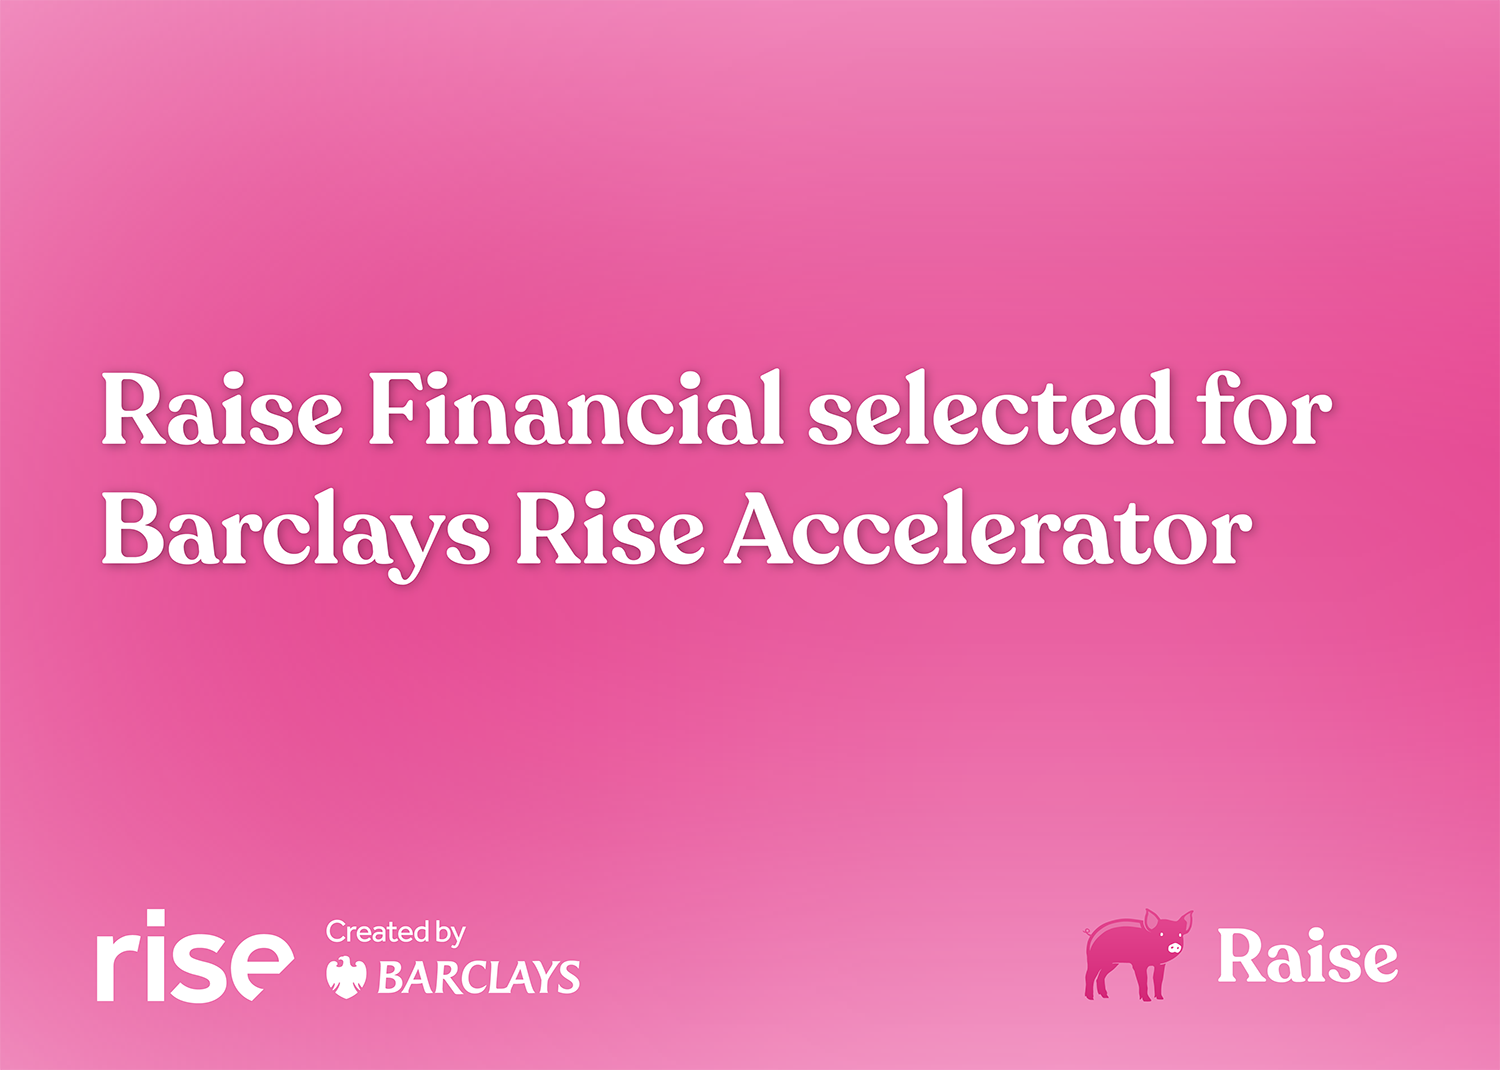 Raise Financial selected for Barclays Rise Accelerator